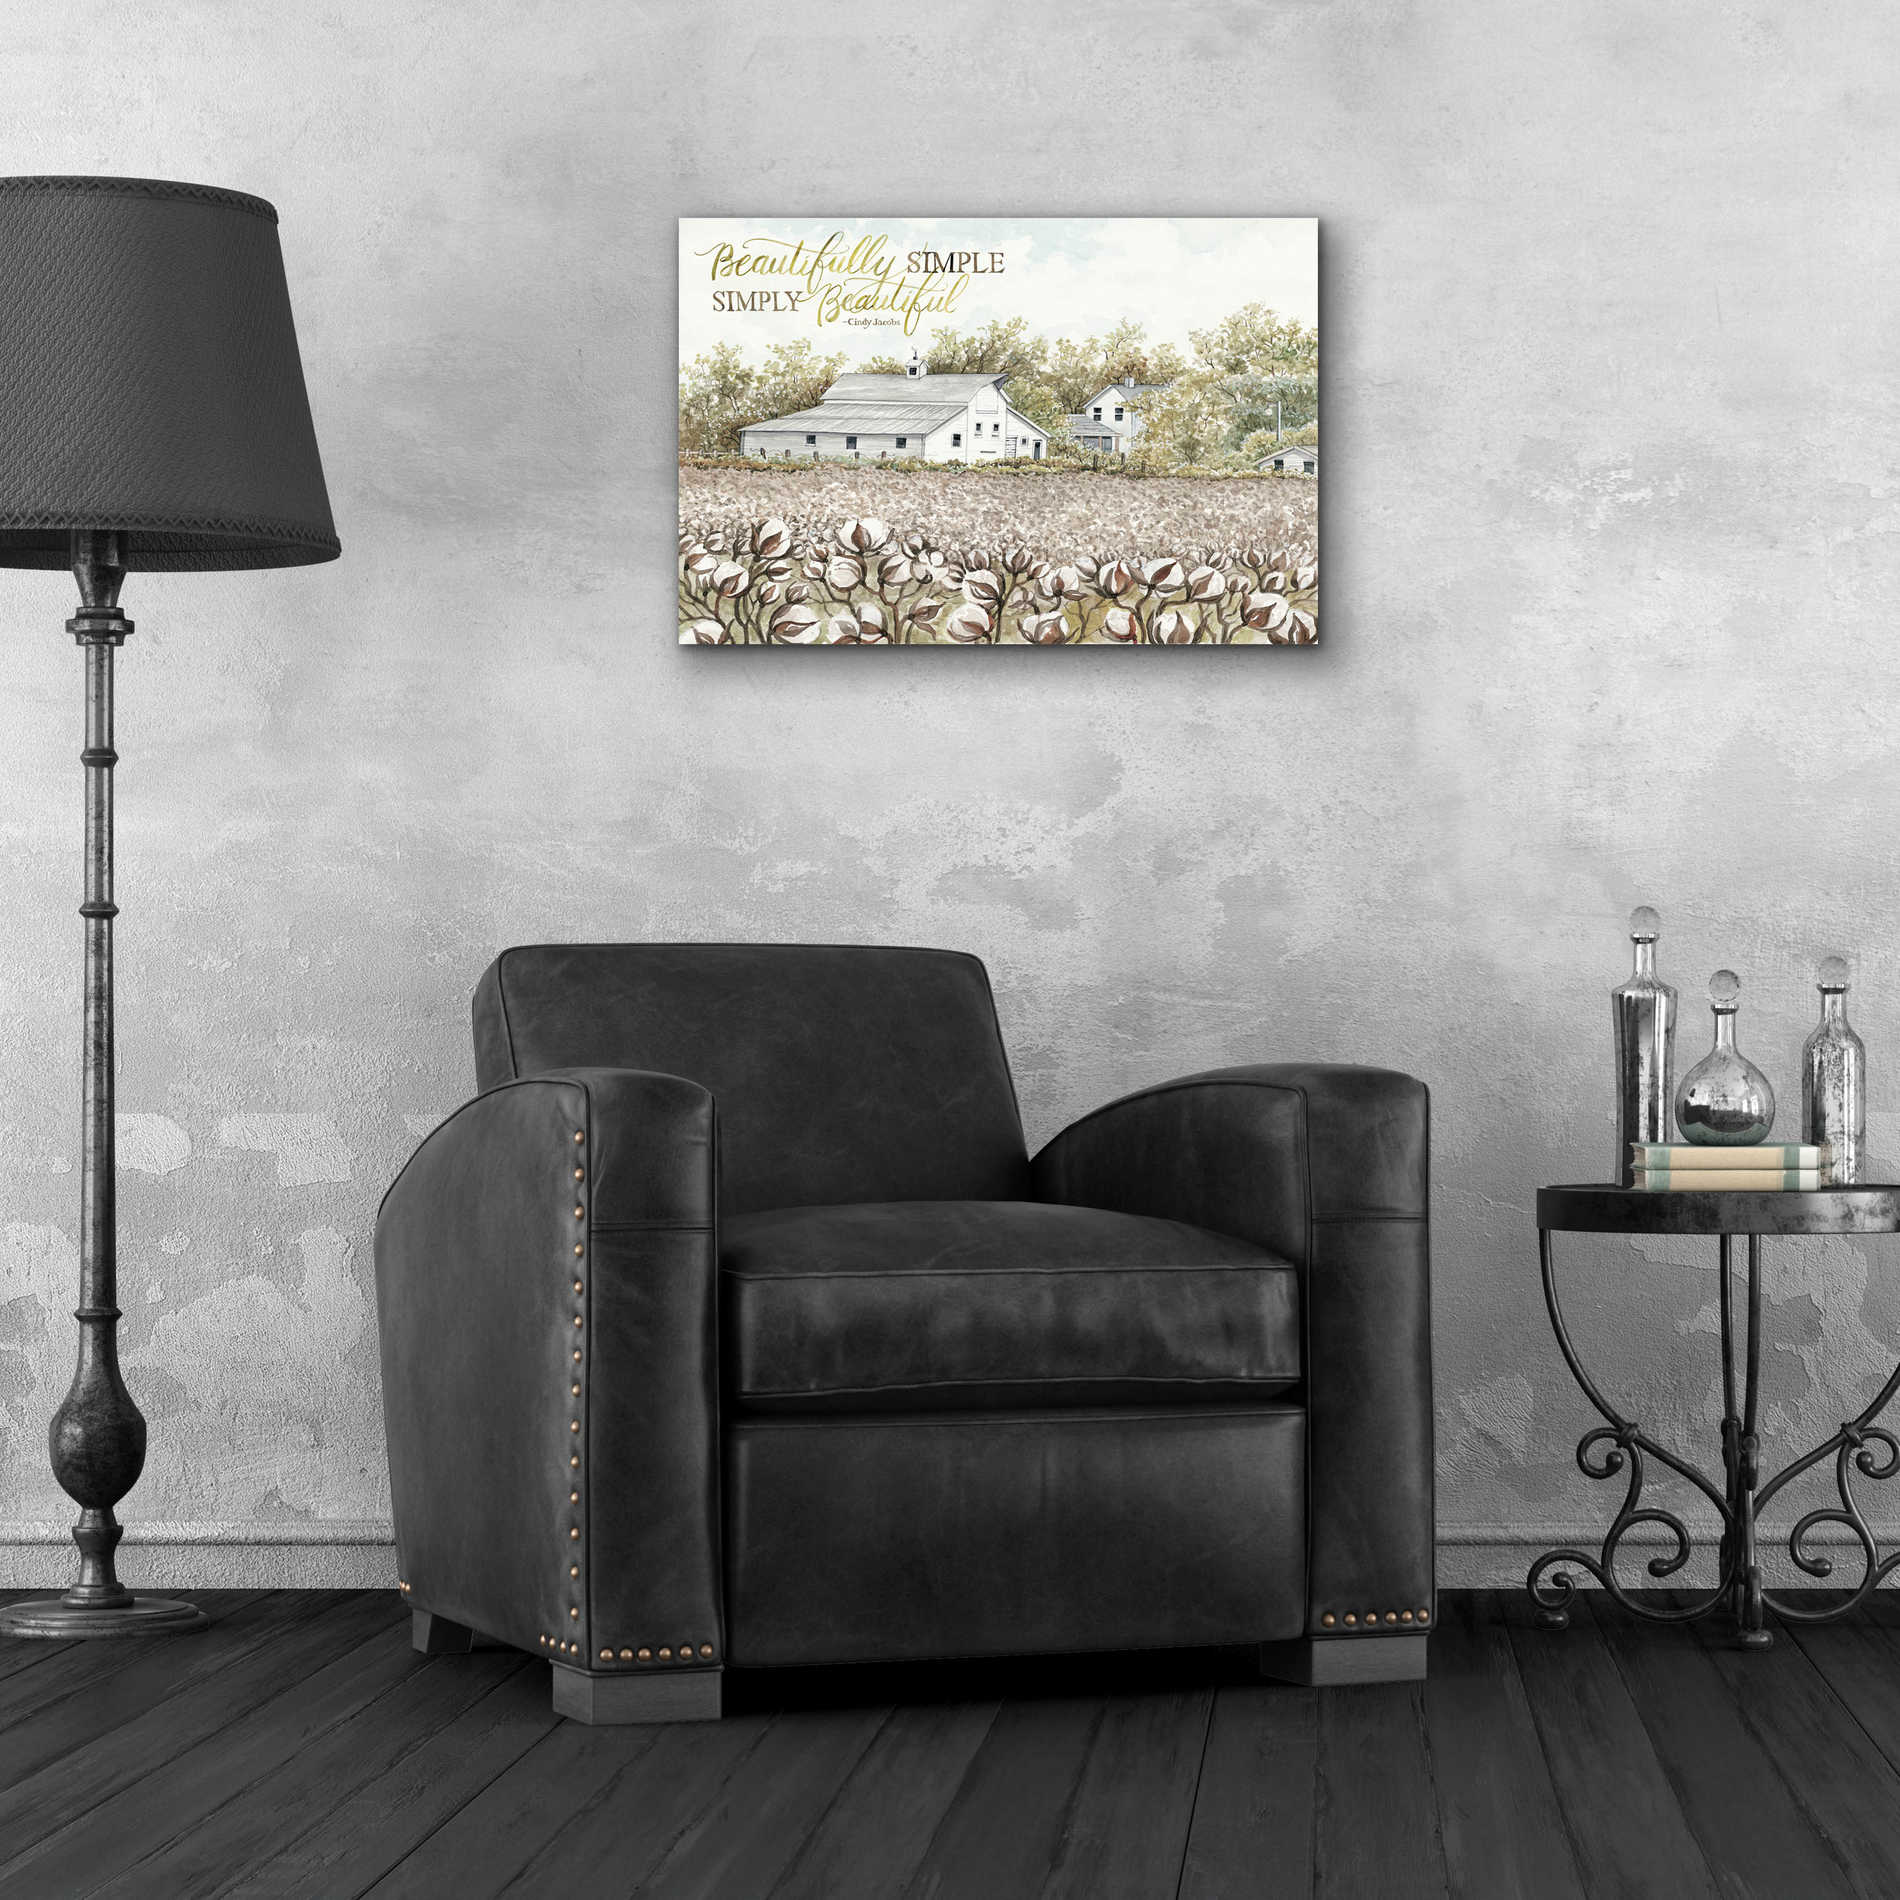 Epic Art 'Beautifully Simple Cotton Farm' by Cindy Jacobs, Acrylic Glass Wall Art,24x16